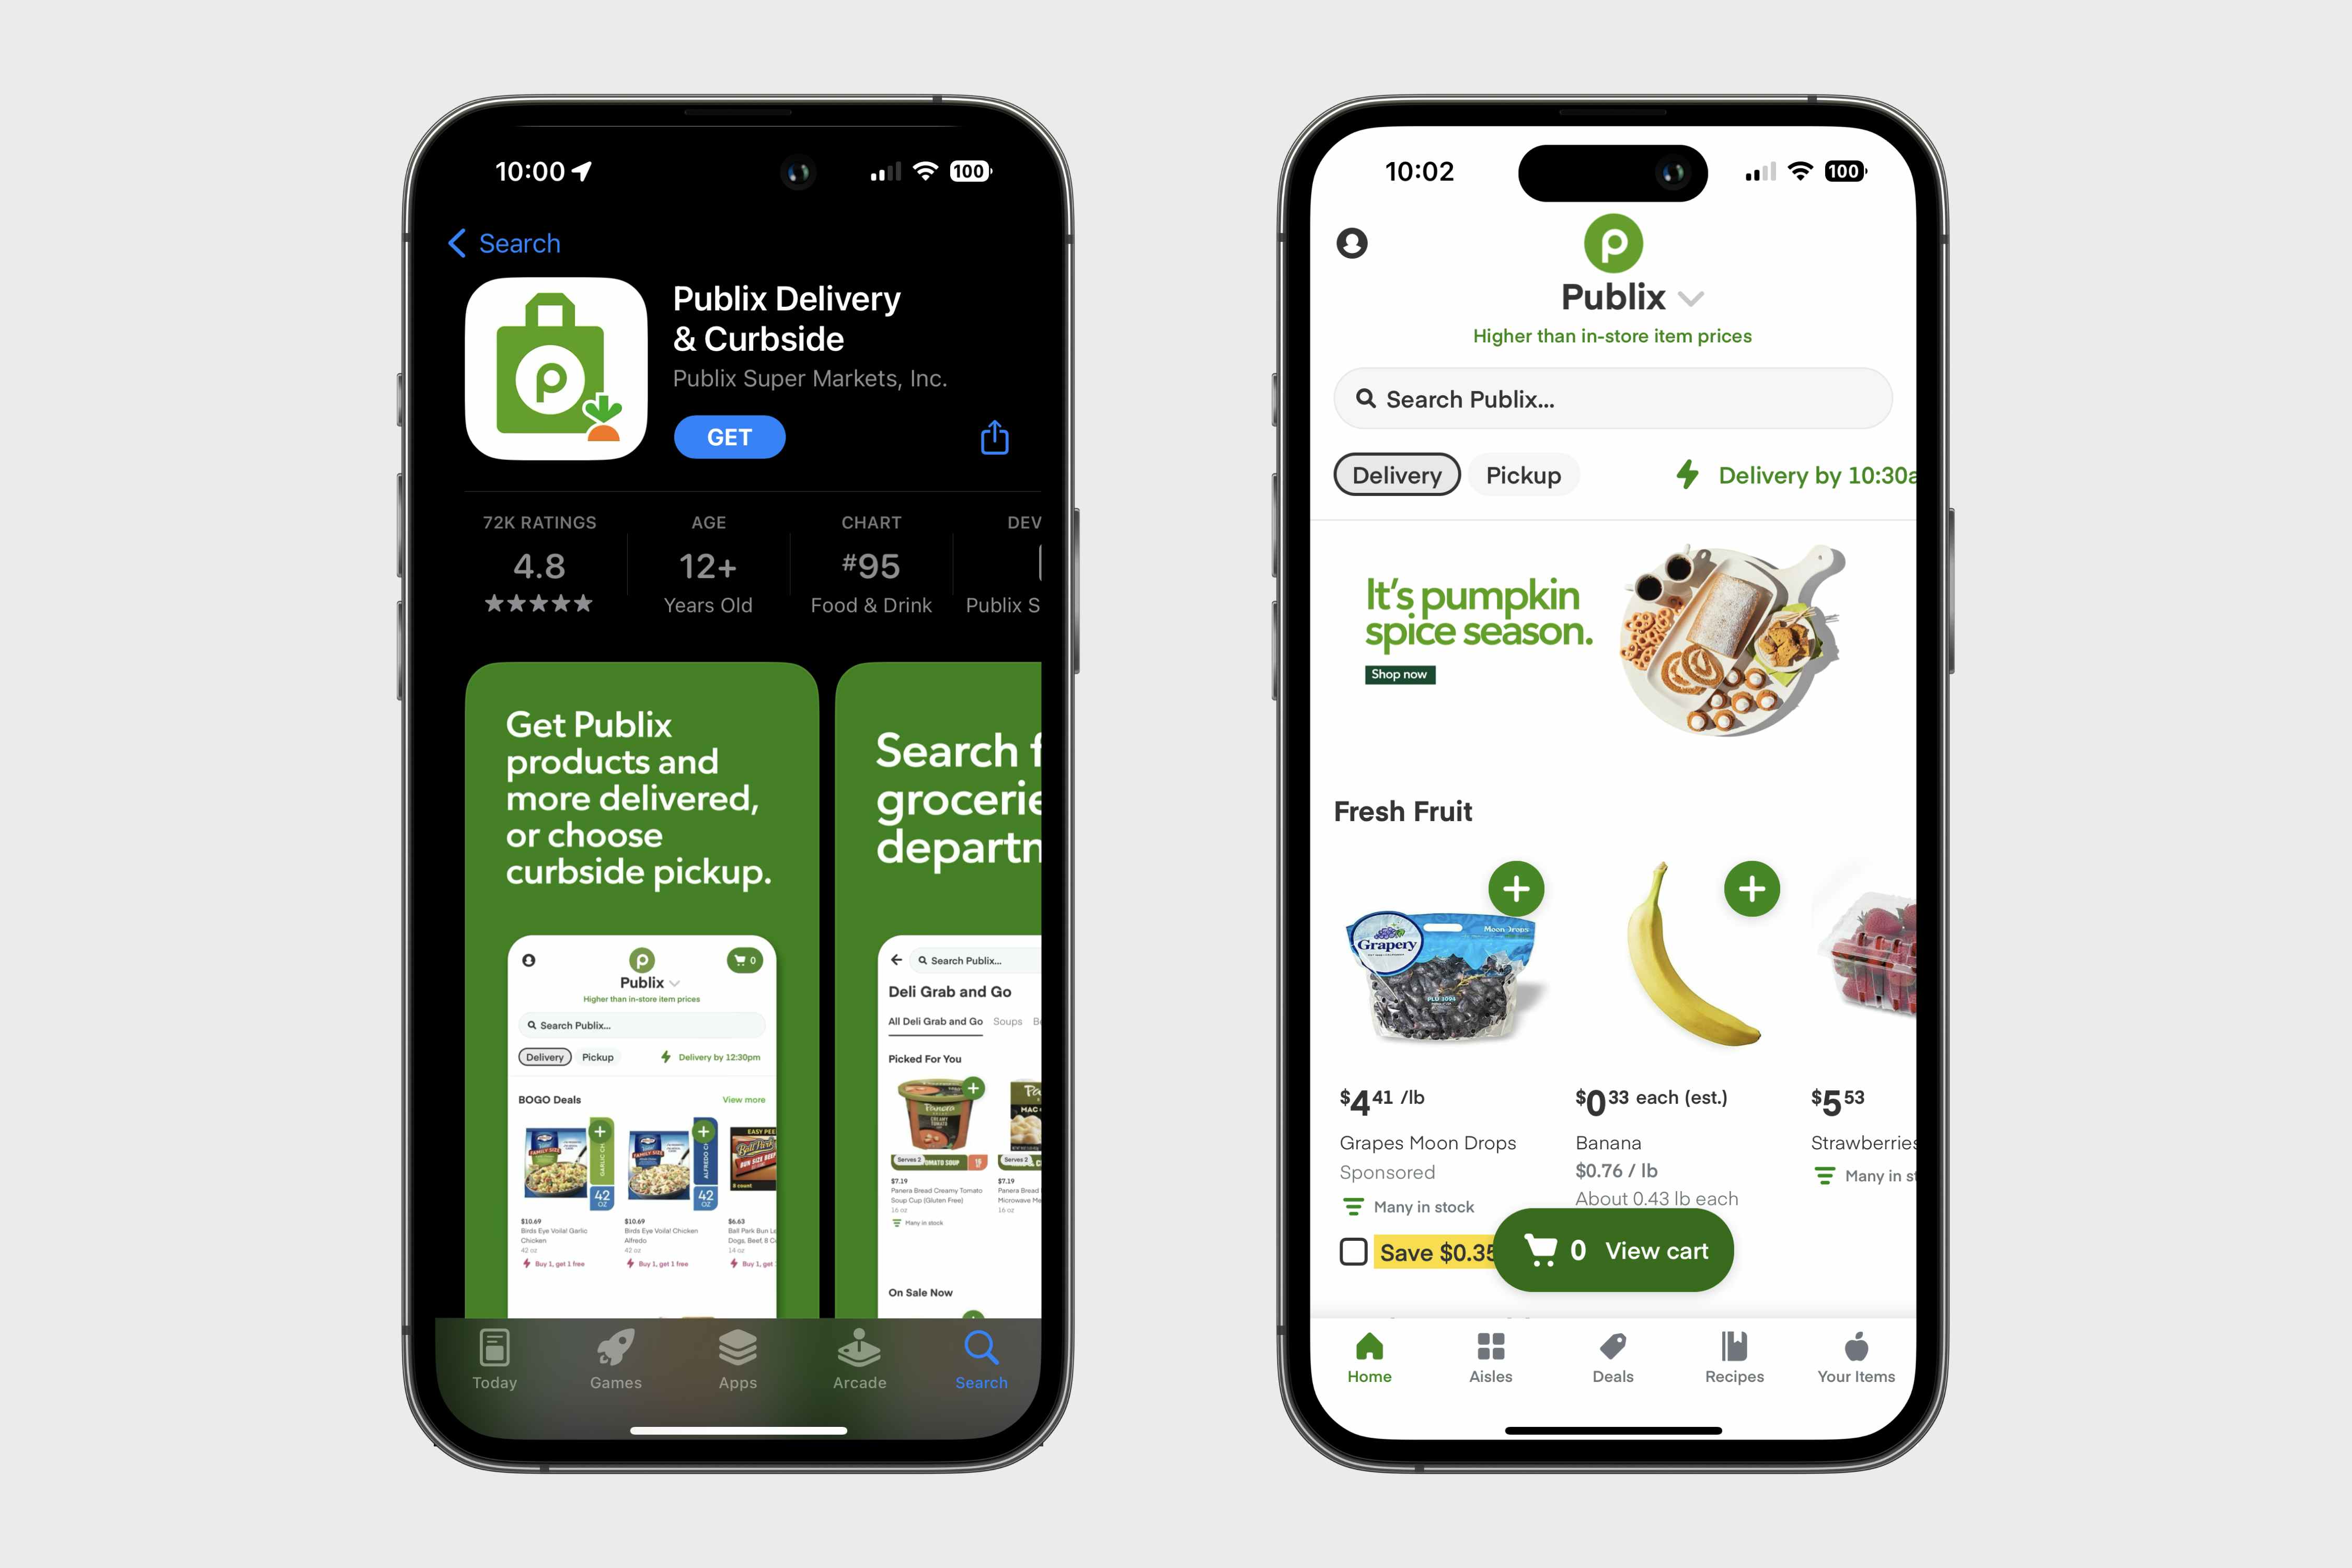 two phones showing the Publix Delivery app in the app store and the home page in the app.